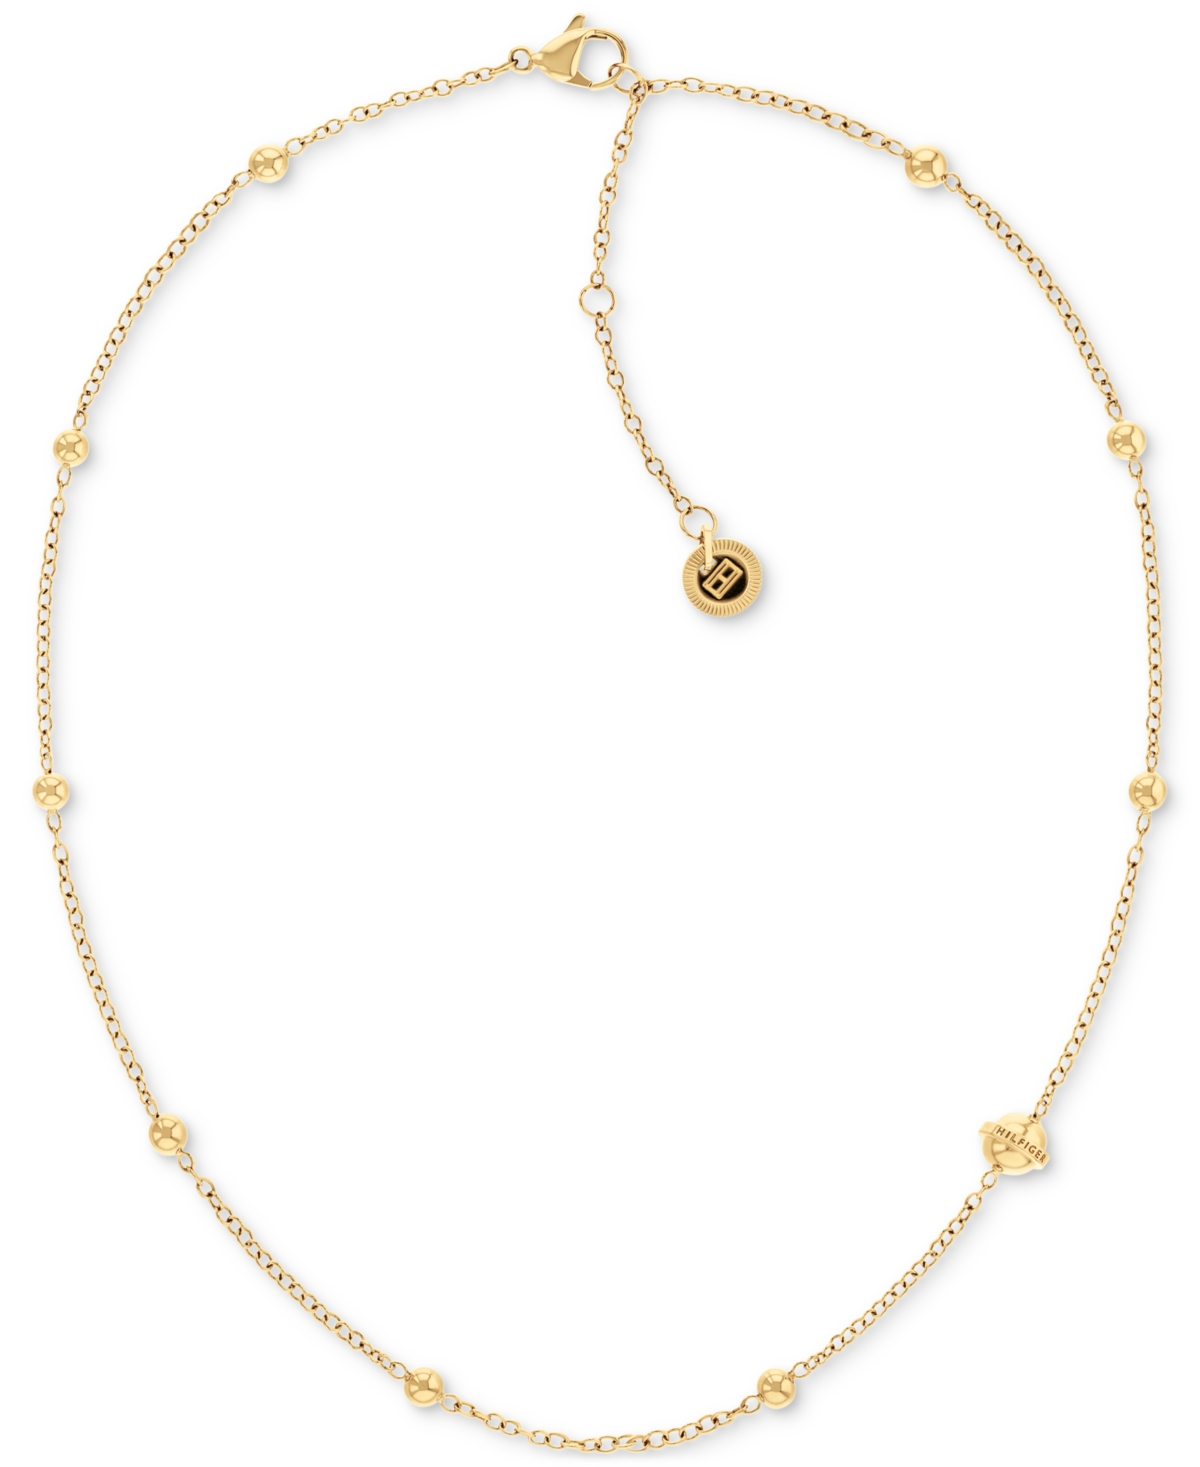 Tommy Hilfiger Stainless Steel Metallic Orb Station Necklace, 16" + 2" Extender In Gold